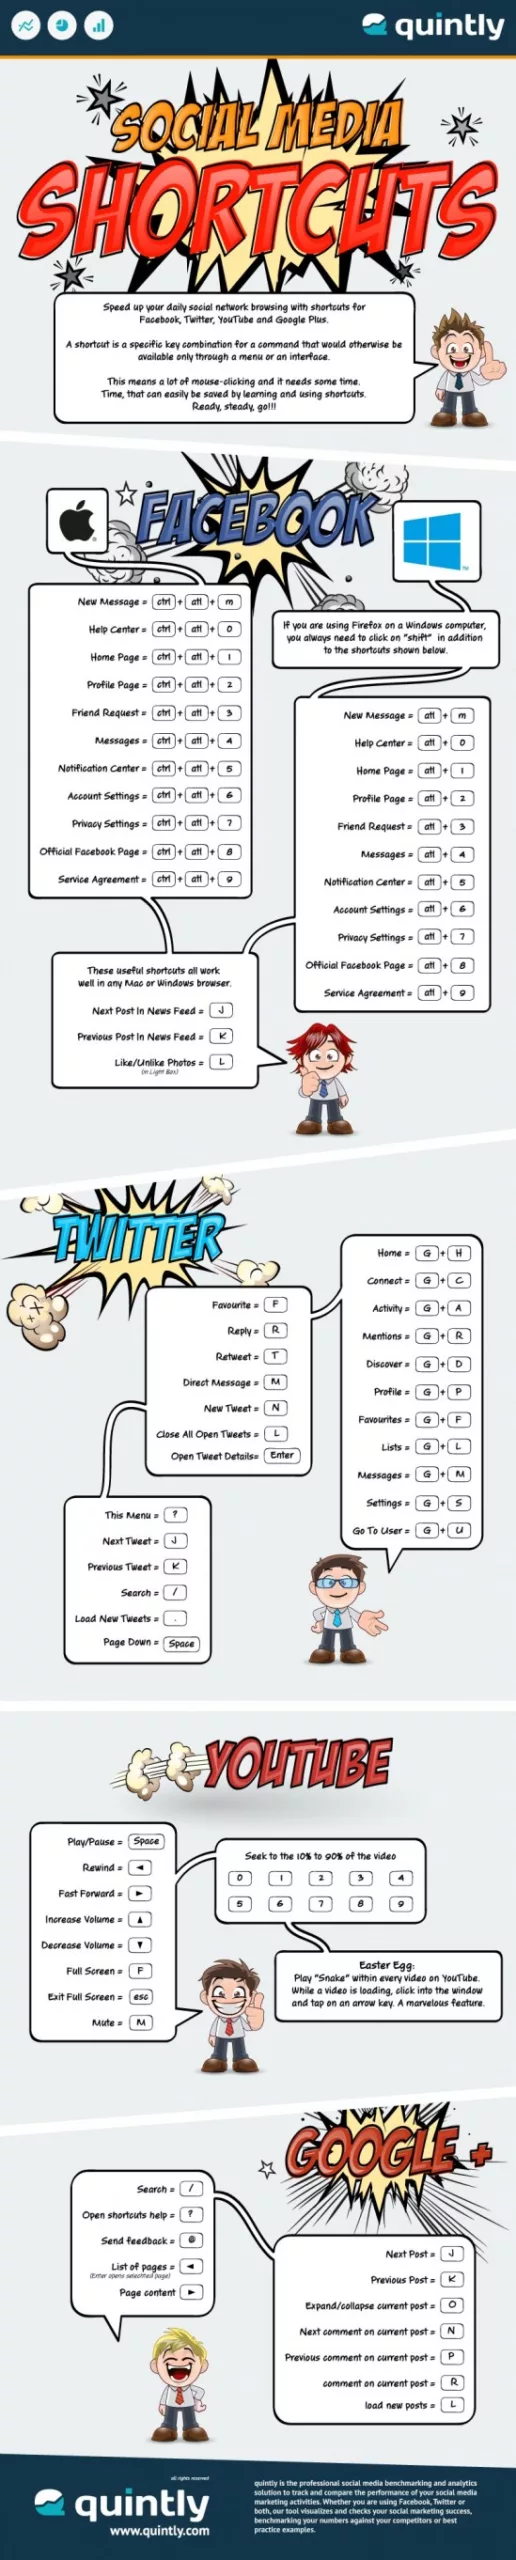 raccourcis-clavier-facebook-infographie